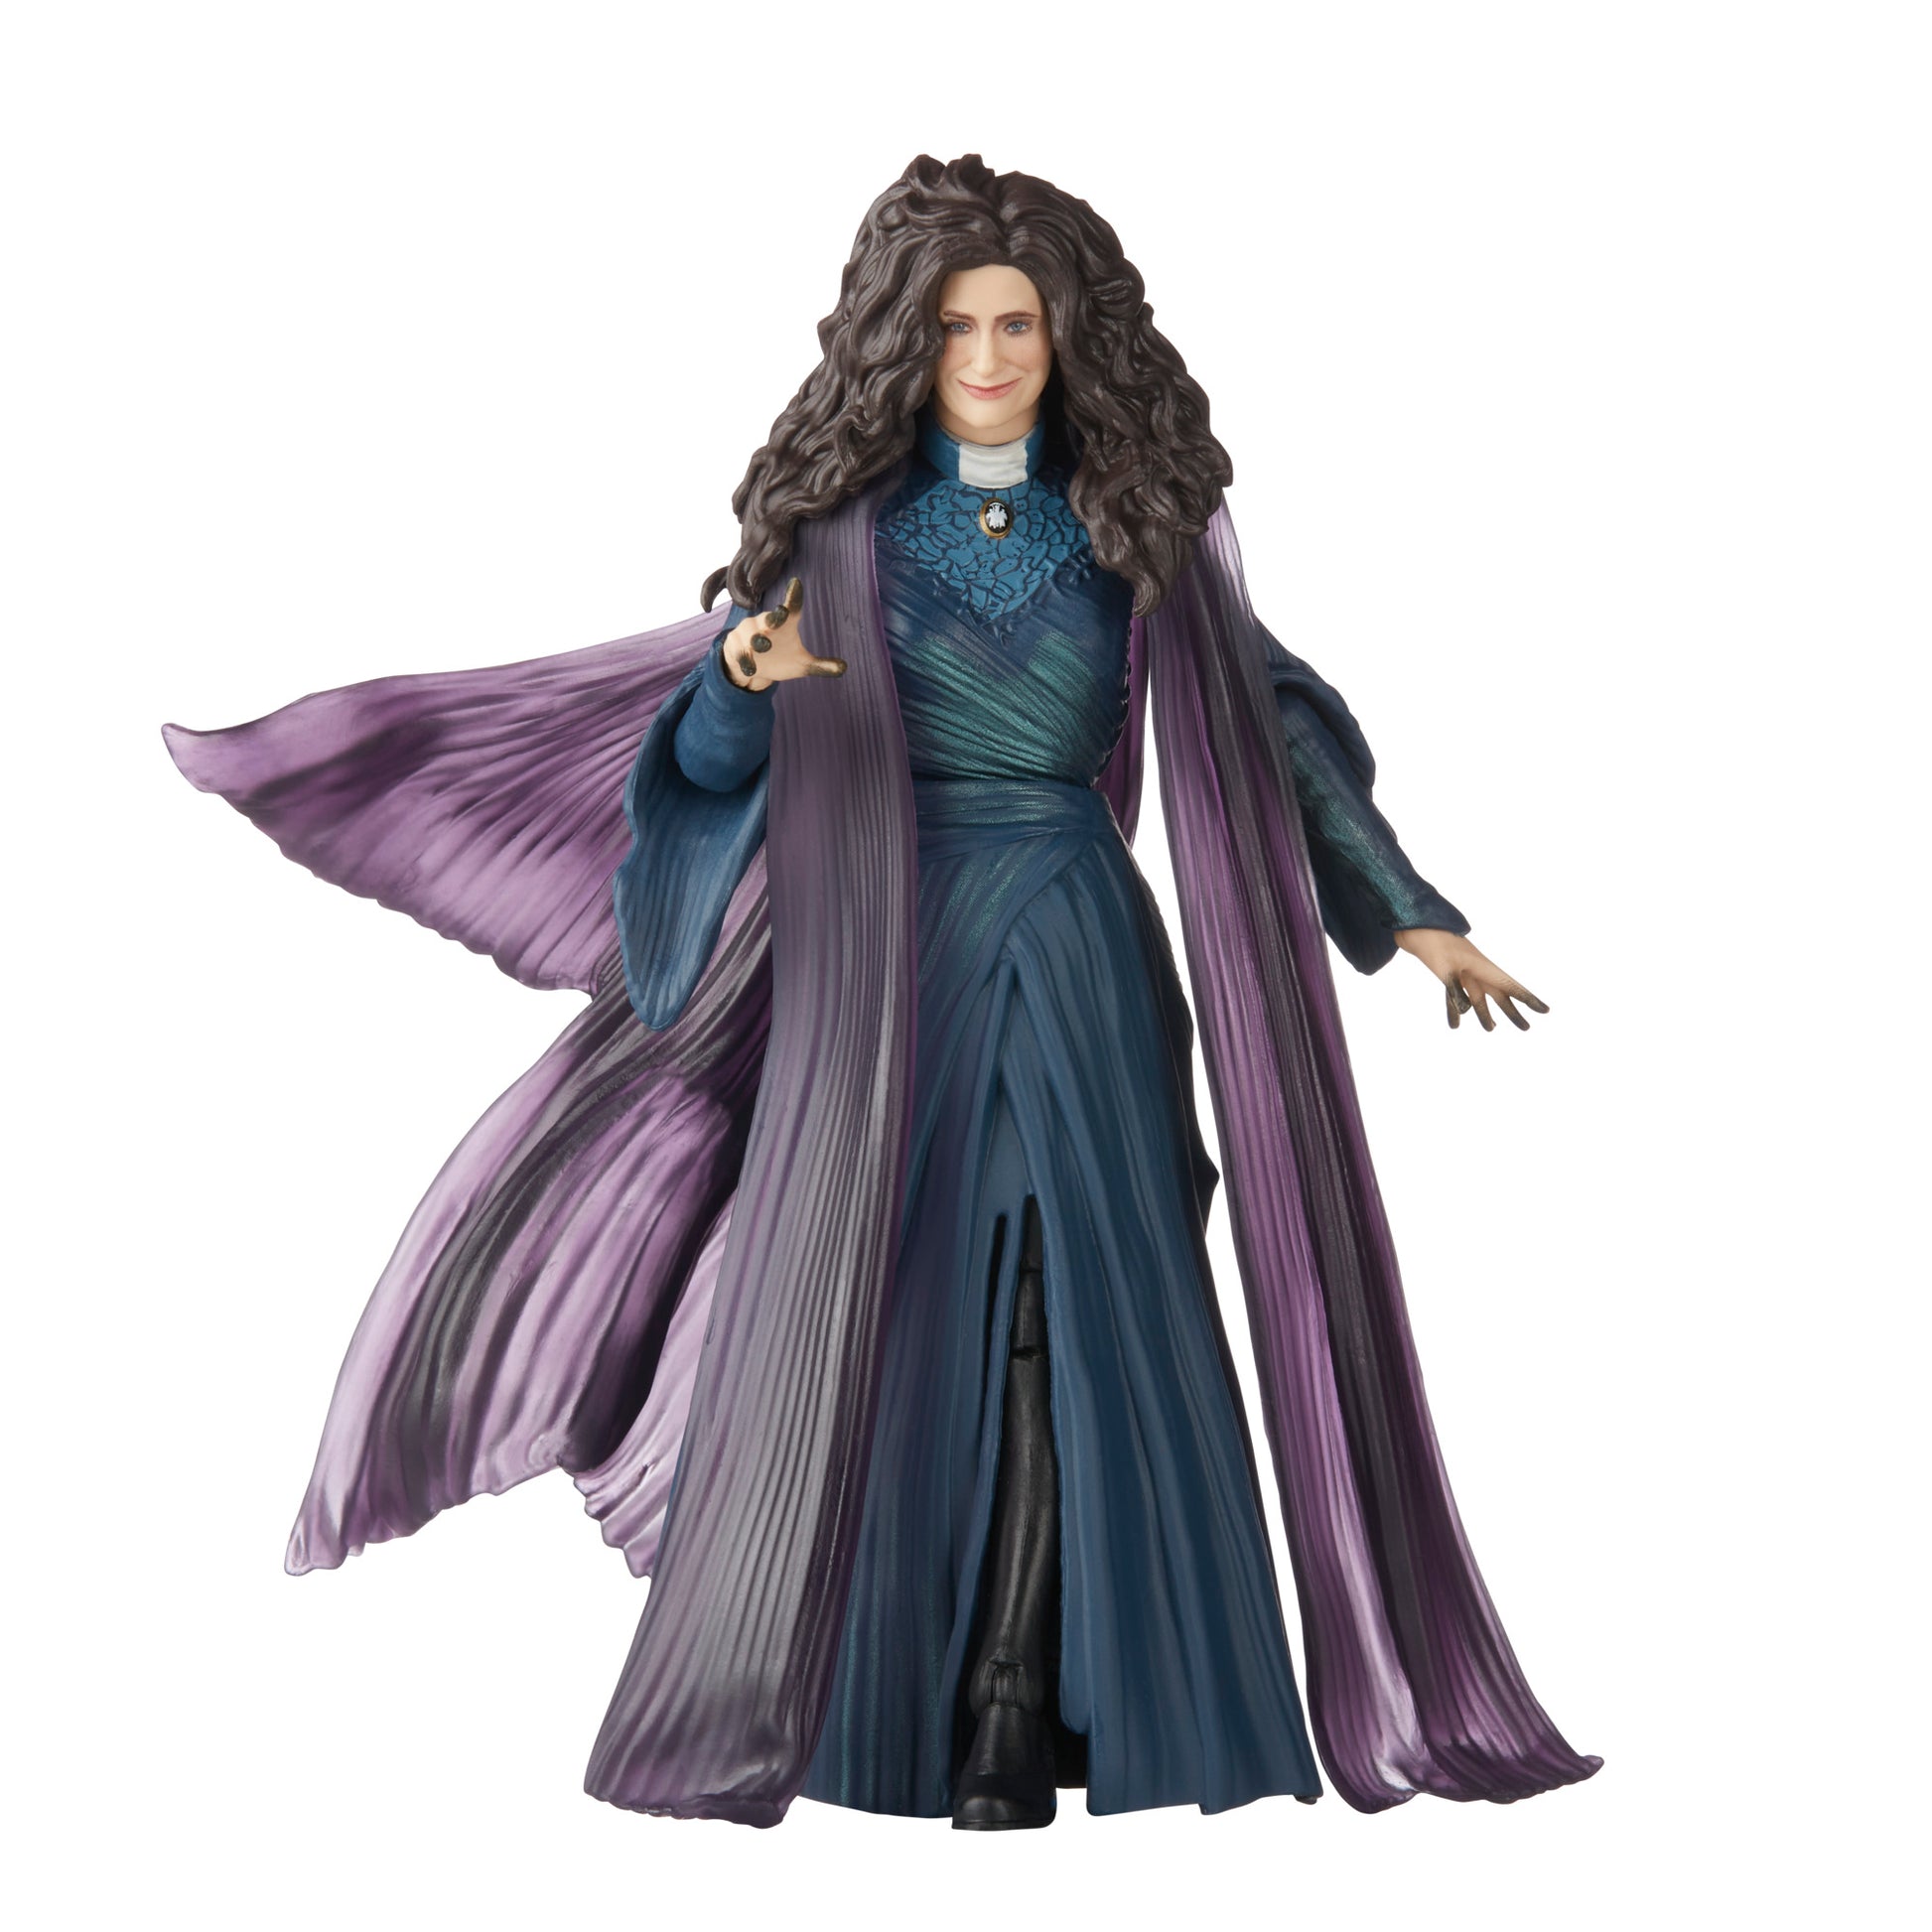 Marvel Legends Series Agatha Harkness Action Figure 6-Inch Toy - Heretoserveyou